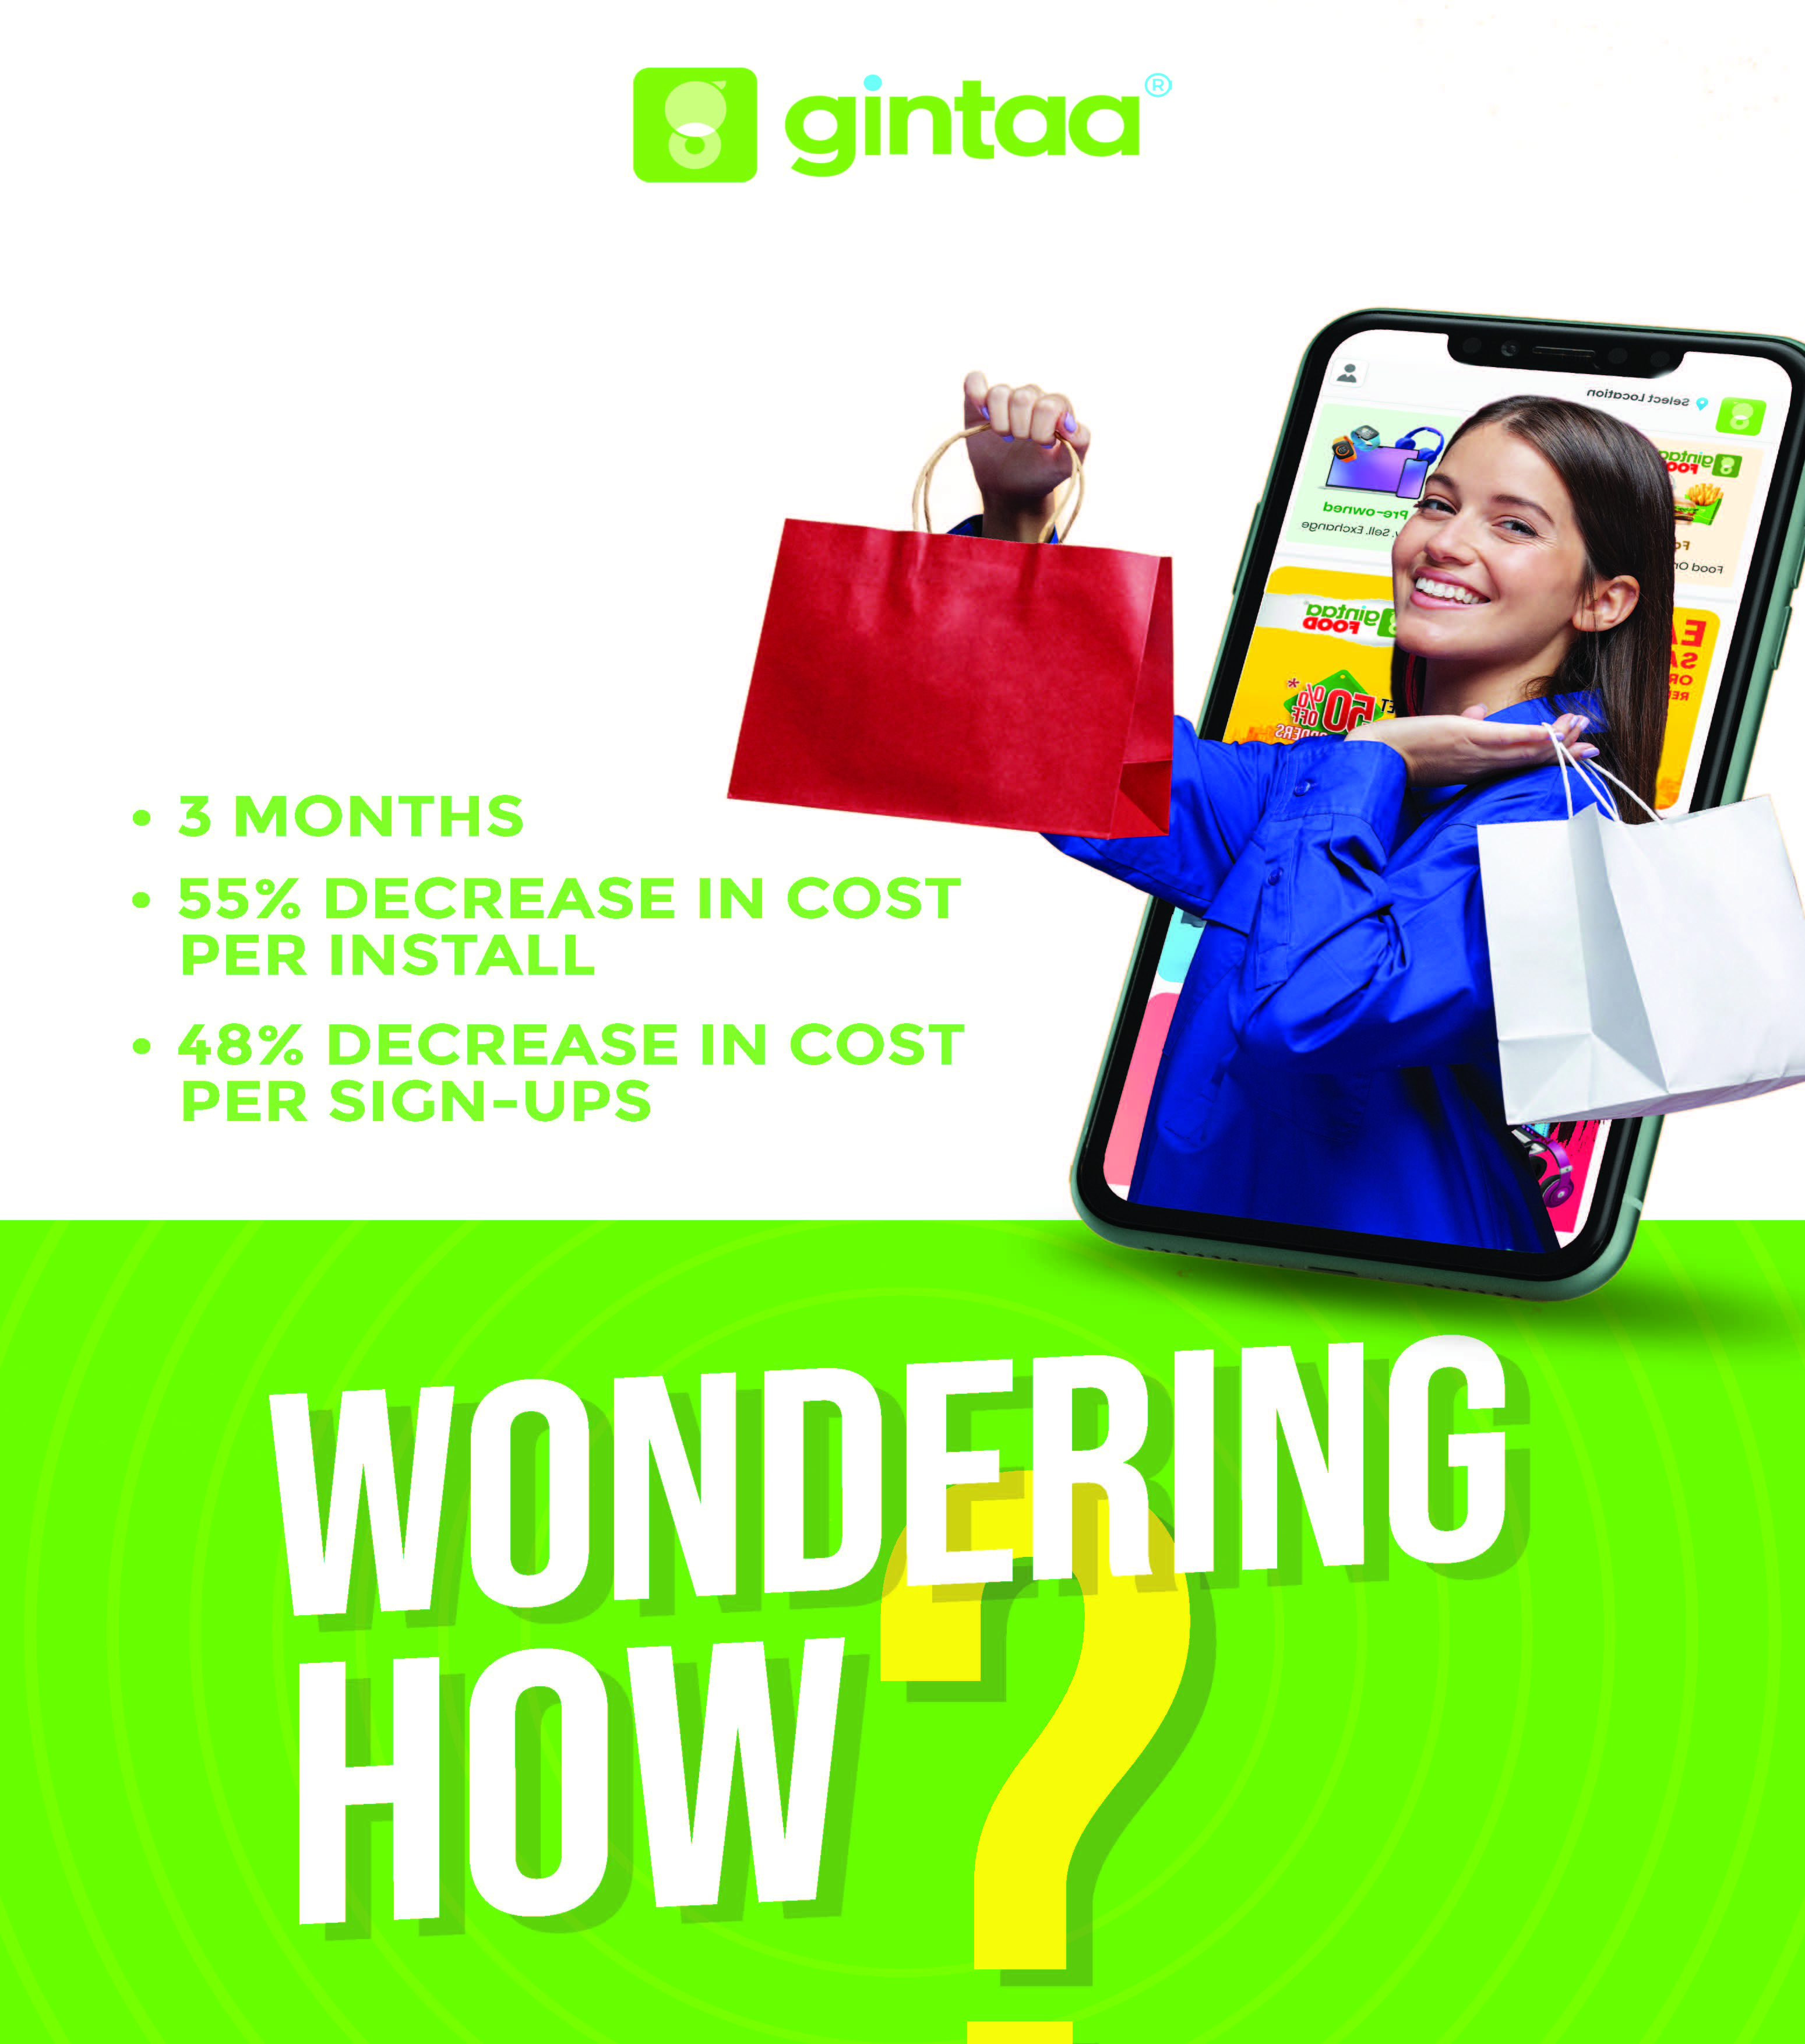 Gintaa's Triumph: 3-Month Strategy Slashes Cost Per Install by 55% and Cost Per Sign-Ups by 48%